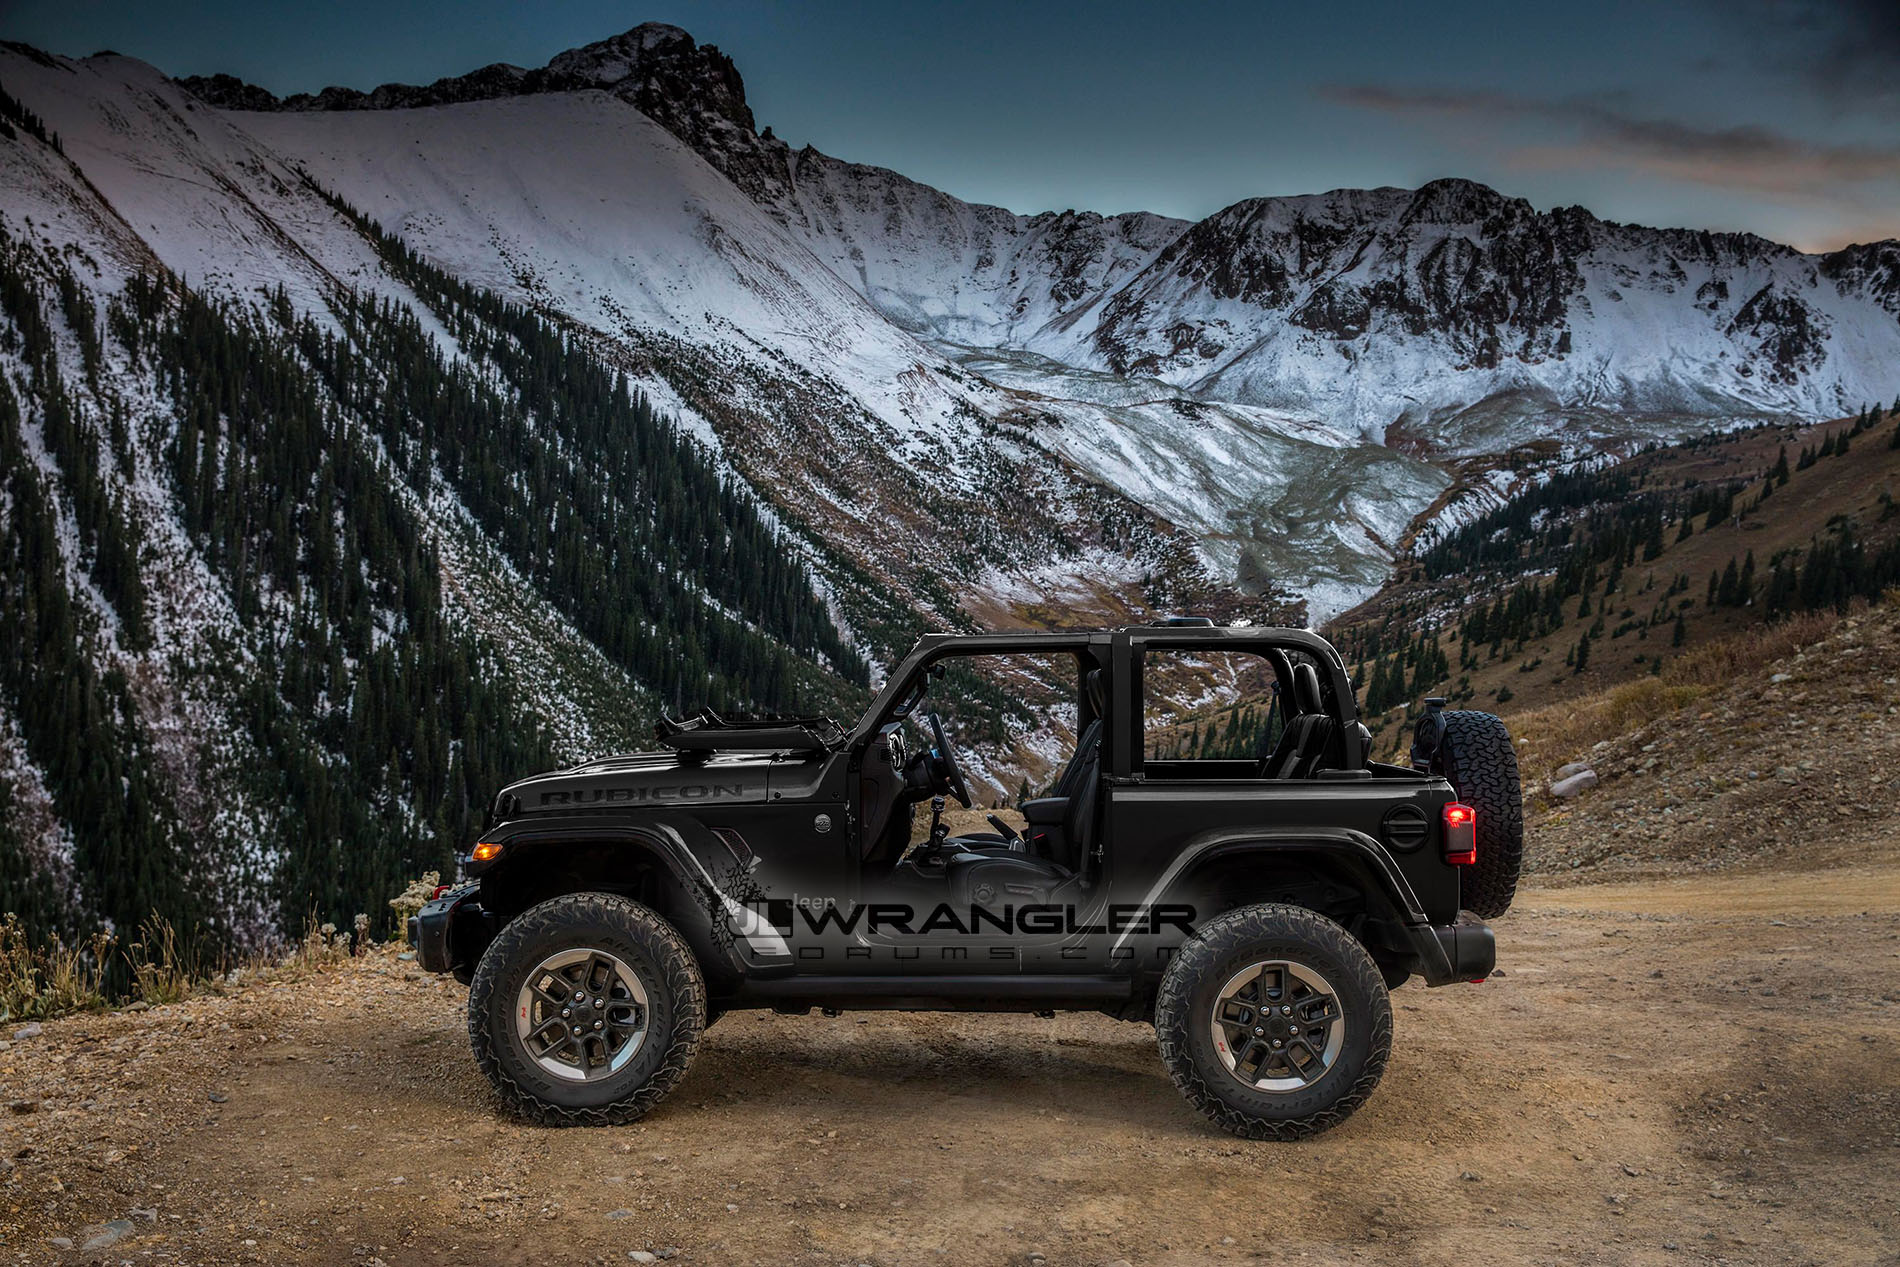 2018 Jeep Wrangler Leaked Color Options Include 